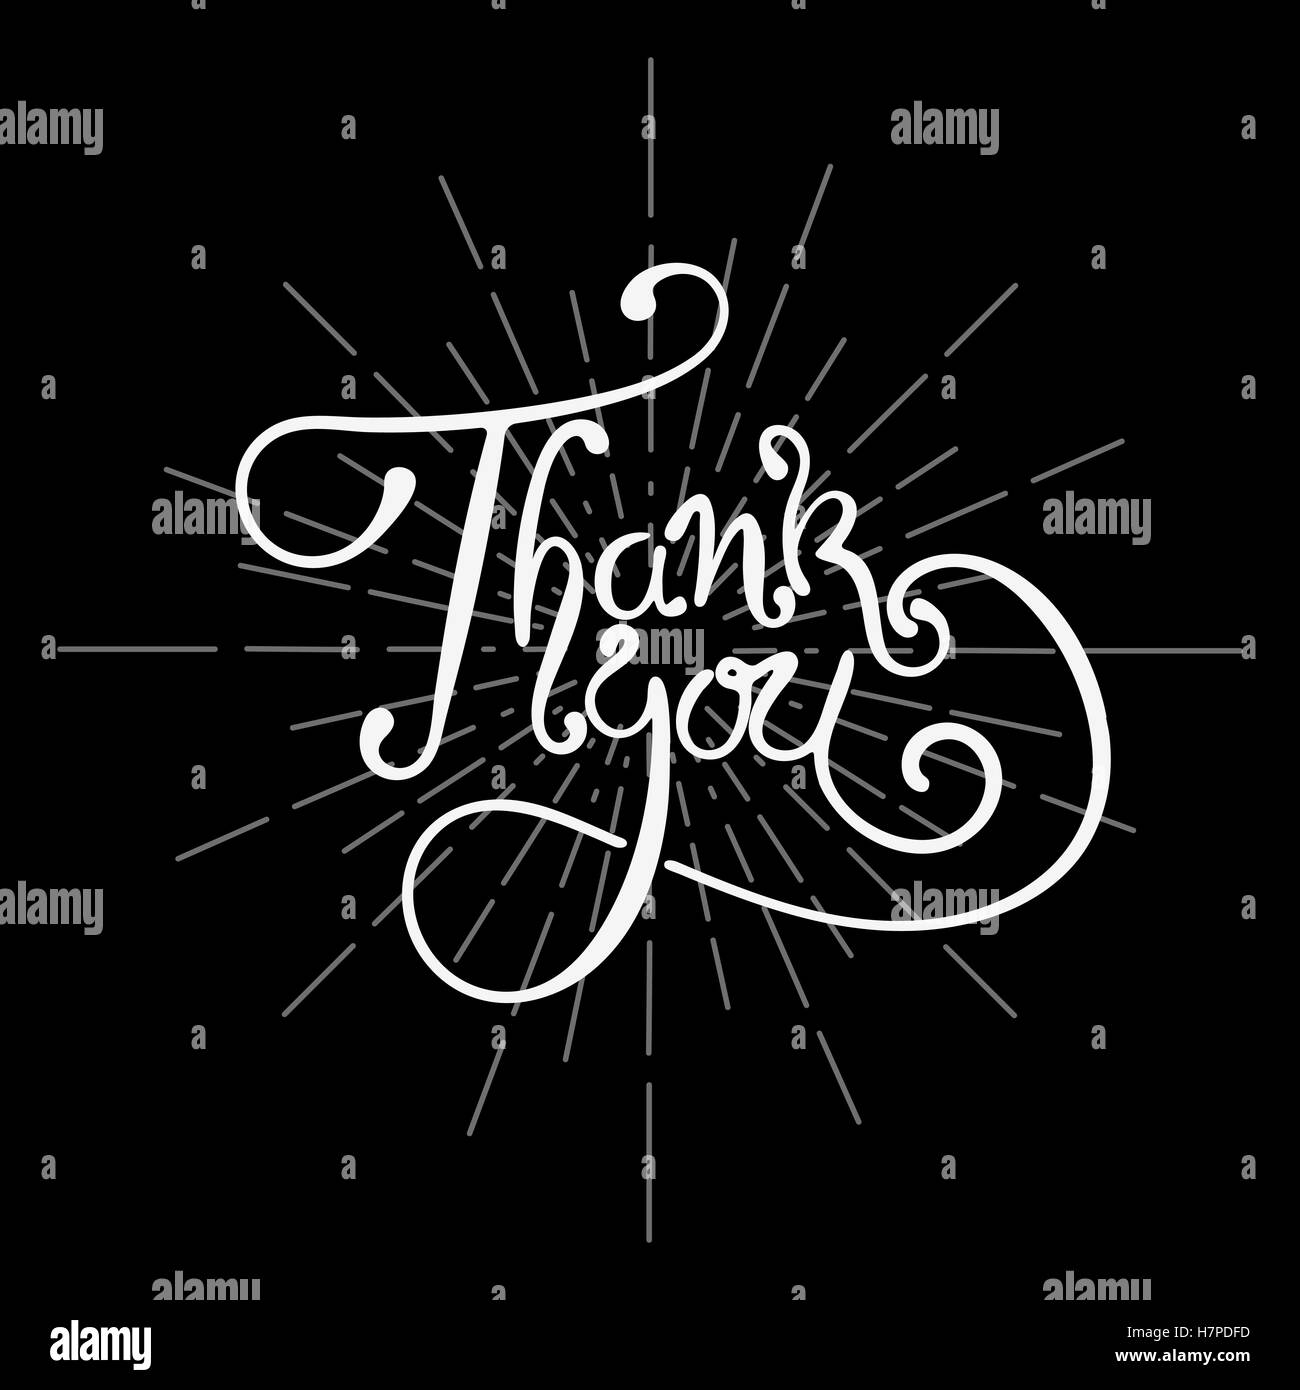 thank you lettering Stock Vector